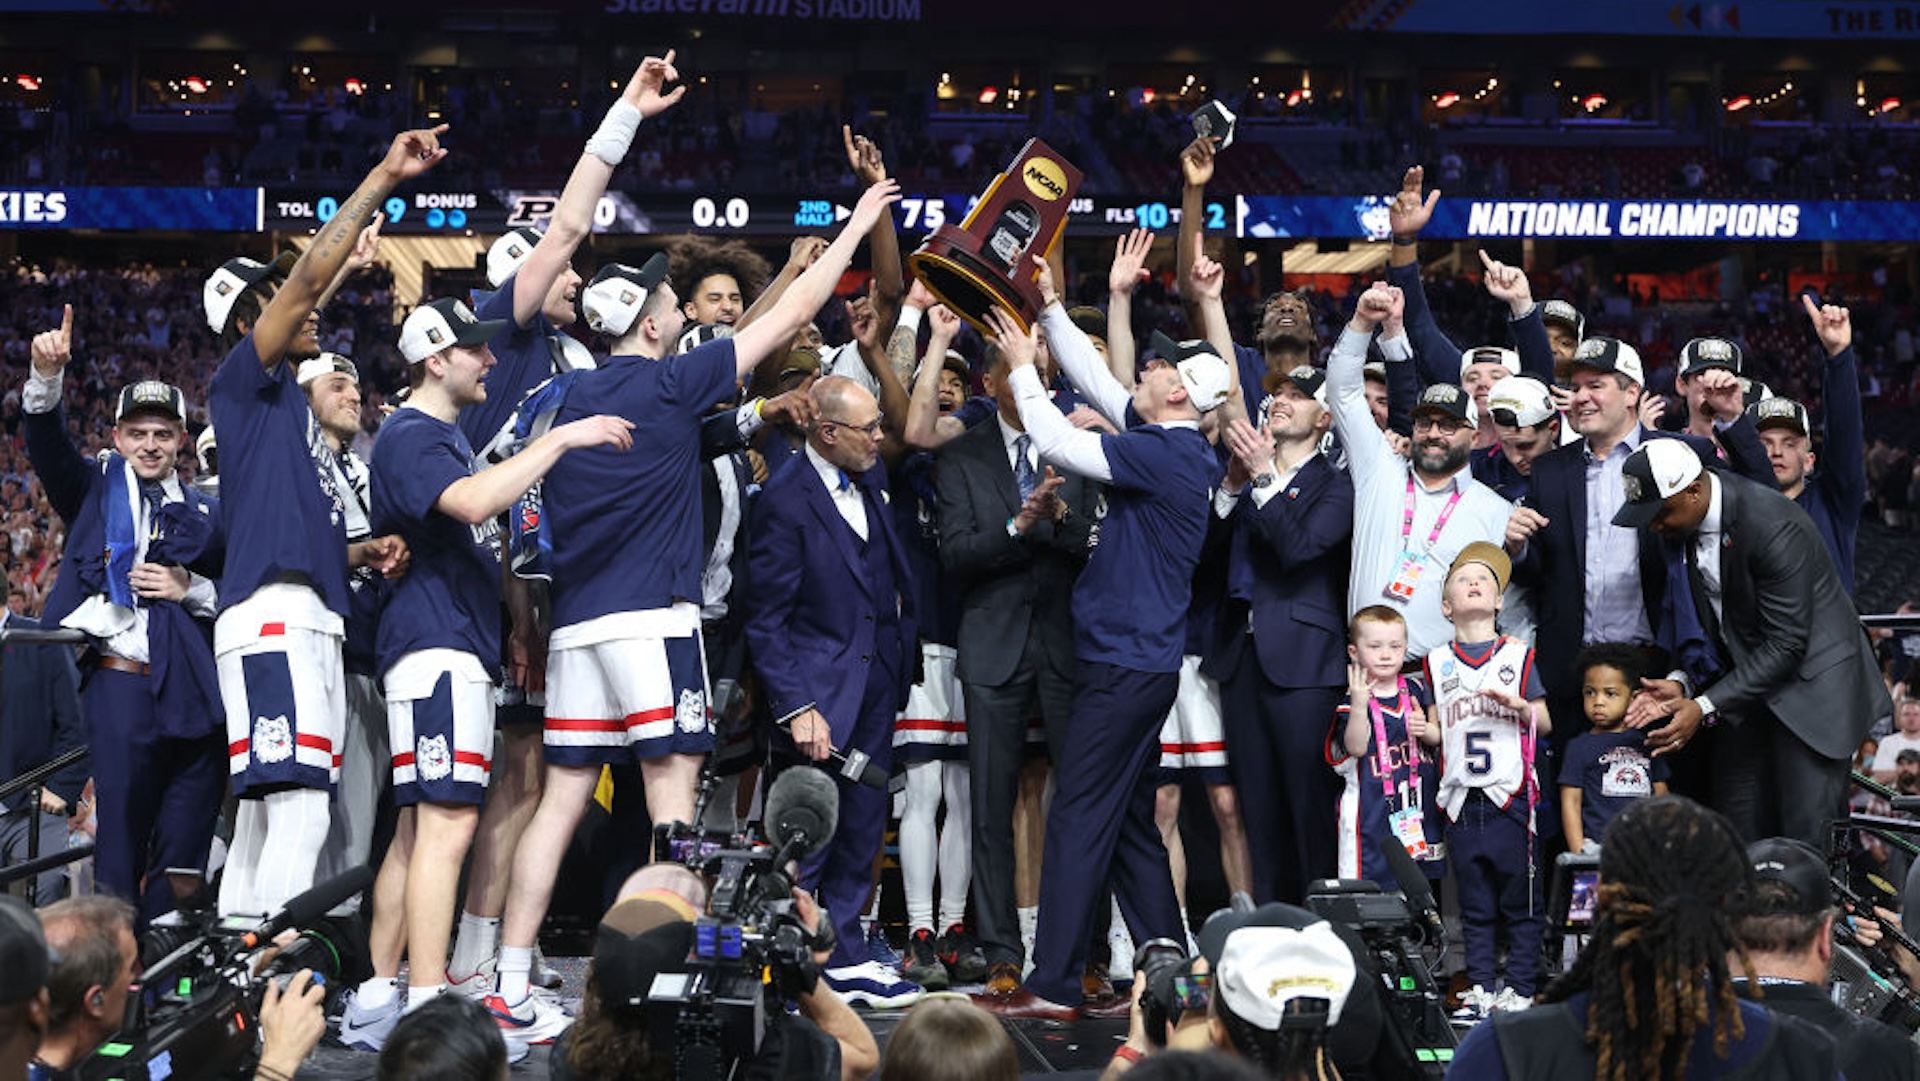 The Connecticut Huskies celebrate with the trophy after beating the Purdue Boilermakers 75-60 to win the NCAA Men's Basketball Tournament National Championship game at State Farm Stadium on April 08, 2024 in Glendale, Arizona.